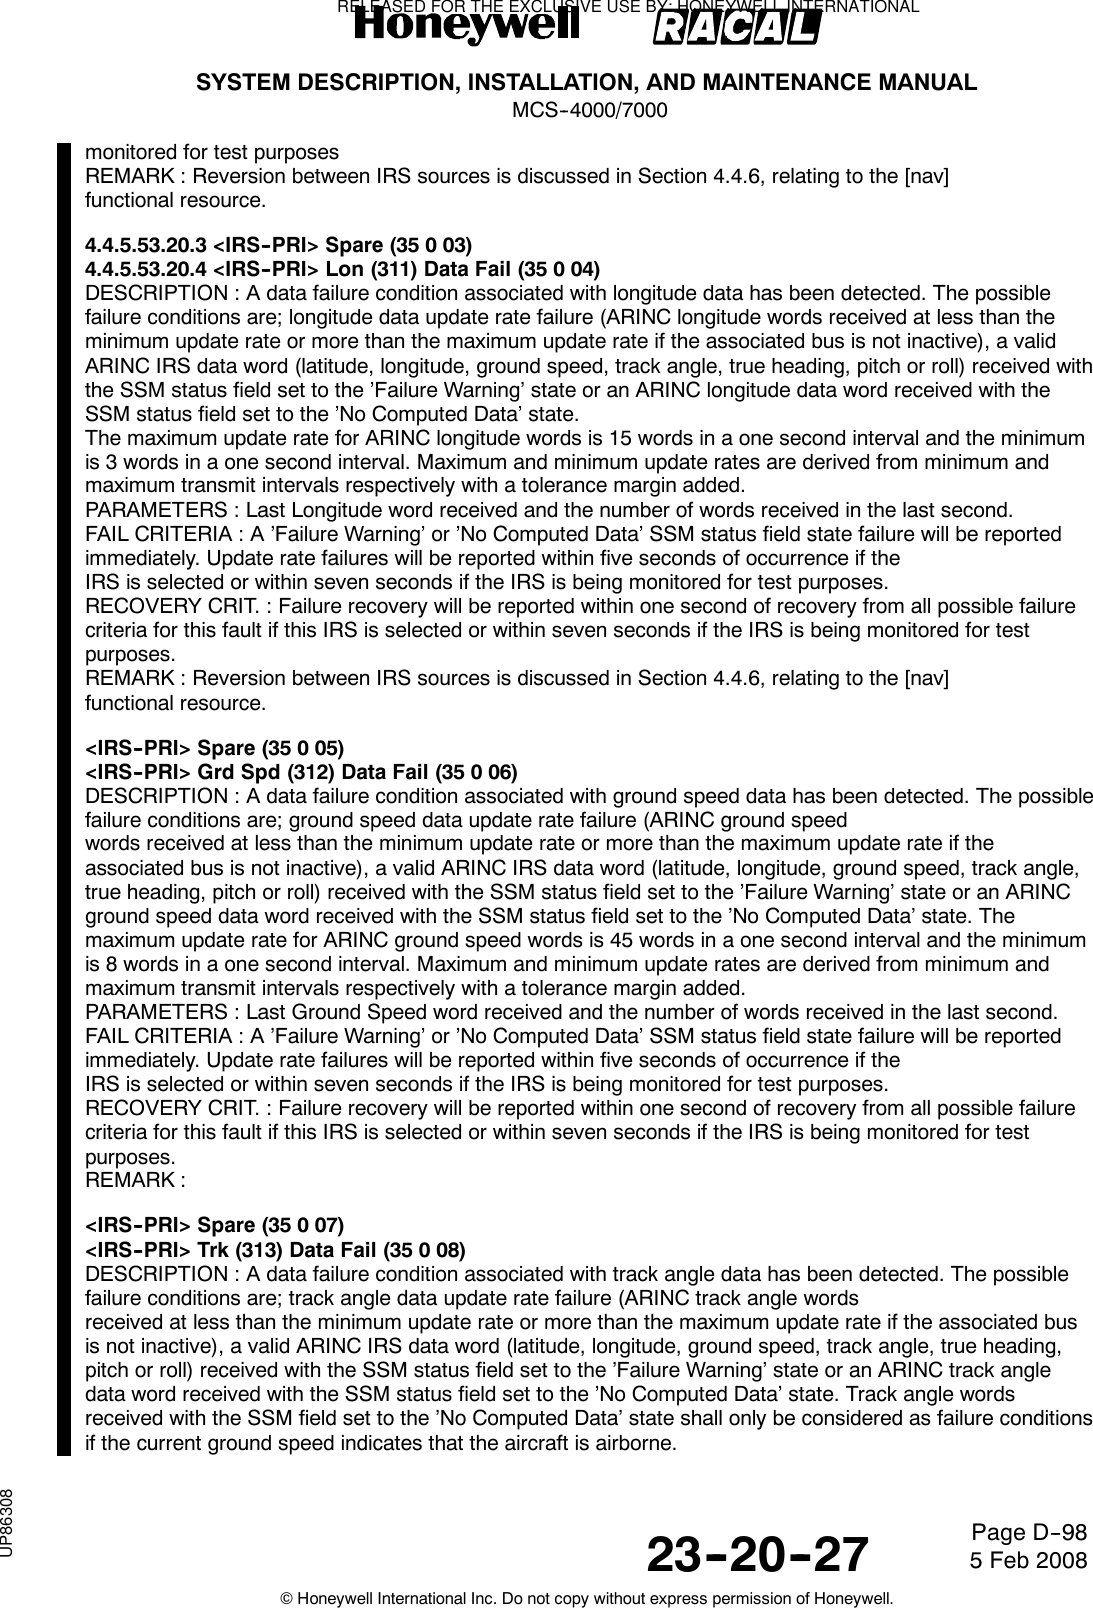 SYSTEM DESCRIPTION, INSTALLATION, AND MAINTENANCE MANUALMCS--4000/700023--20--27 5 Feb 2008©Honeywell International Inc. Do not copy without express permission of Honeywell.Page D--98monitored for test purposesREMARK : Reversion between IRS sources is discussed in Section 4.4.6, relating to the [nav]functional resource.4.4.5.53.20.3 &lt;IRS--PRI&gt; Spare (35 0 03)4.4.5.53.20.4 &lt;IRS--PRI&gt; Lon (311) Data Fail (35 0 04)DESCRIPTION : A data failure condition associated with longitude data has been detected. The possiblefailure conditions are; longitude data update rate failure (ARINC longitude words received at less than theminimum update rate or more than the maximum update rate if the associated bus is not inactive), a validARINC IRS data word (latitude, longitude, ground speed, track angle, true heading, pitch or roll) received withthe SSM status field set to the ’Failure Warning’ state or an ARINC longitude data word received with theSSM status field set to the ’No Computed Data’ state.The maximum update rate for ARINC longitude words is 15 words in a one second interval and the minimumis 3 words in a one second interval. Maximum and minimum update rates are derived from minimum andmaximum transmit intervals respectively with a tolerance margin added.PARAMETERS : Last Longitude word received and the number of words received in the last second.FAIL CRITERIA : A ’Failure Warning’ or ’No Computed Data’ SSM status field state failure will be reportedimmediately. Update rate failures will be reported within five seconds of occurrence if theIRS is selected or within seven seconds if the IRS is being monitored for test purposes.RECOVERY CRIT. : Failure recovery will be reported within one second of recovery from all possible failurecriteria for this fault if this IRS is selected or within seven seconds if the IRS is being monitored for testpurposes.REMARK : Reversion between IRS sources is discussed in Section 4.4.6, relating to the [nav]functional resource.&lt;IRS--PRI&gt; Spare (35 0 05)&lt;IRS--PRI&gt; Grd Spd (312) Data Fail (35 0 06)DESCRIPTION : A data failure condition associated with ground speed data has been detected. The possiblefailure conditions are; ground speed data update rate failure (ARINC ground speedwords received at less than the minimum update rate or more than the maximum update rate if theassociated bus is not inactive), a valid ARINC IRS data word (latitude, longitude, ground speed, track angle,true heading, pitch or roll) received with the SSM status field set to the ’Failure Warning’ state or an ARINCground speed data word received with the SSM status field set to the ’No Computed Data’ state. Themaximum update rate for ARINC ground speed words is 45 words in a one second interval and the minimumis 8 words in a one second interval. Maximum and minimum update rates are derived from minimum andmaximum transmit intervals respectively with a tolerance margin added.PARAMETERS : Last Ground Speed word received and the number of words received in the last second.FAIL CRITERIA : A ’Failure Warning’ or ’No Computed Data’ SSM status field state failure will be reportedimmediately. Update rate failures will be reported within five seconds of occurrence if theIRS is selected or within seven seconds if the IRS is being monitored for test purposes.RECOVERY CRIT. : Failure recovery will be reported within one second of recovery from all possible failurecriteria for this fault if this IRS is selected or within seven seconds if the IRS is being monitored for testpurposes.REMARK :&lt;IRS--PRI&gt; Spare (35 0 07)&lt;IRS--PRI&gt; Trk (313) Data Fail (35 0 08)DESCRIPTION : A data failure condition associated with track angle data has been detected. The possiblefailure conditions are; track angle data update rate failure (ARINC track angle wordsreceived at less than the minimum update rate or more than the maximum update rate if the associated busis not inactive), a valid ARINC IRS data word (latitude, longitude, ground speed, track angle, true heading,pitch or roll) received with the SSM status field set to the ’Failure Warning’ state or an ARINC track angledata word received with the SSM status field set to the ’No Computed Data’ state. Track angle wordsreceived with the SSM field set to the ’No Computed Data’ state shall only be considered as failure conditionsif the current ground speed indicates that the aircraft is airborne.RELEASED FOR THE EXCLUSIVE USE BY: HONEYWELL INTERNATIONALUP86308